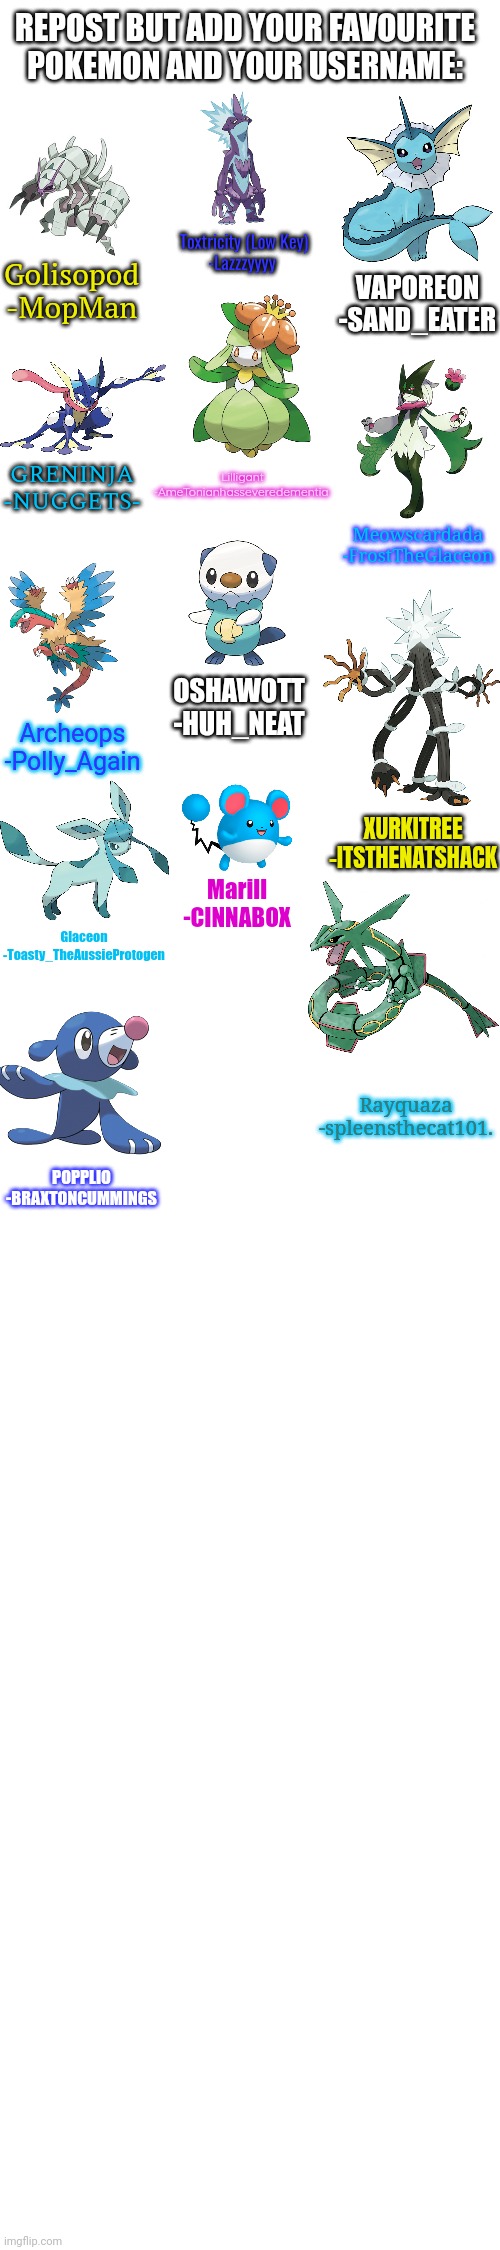 The third and final time I'm doing this | REPOST BUT ADD YOUR FAVOURITE POKEMON AND YOUR USERNAME:; Toxtricity (Low Key)
-Lazzzyyyy; Golisopod
-MopMan; VAPOREON
-SAND_EATER; GRENINJA
-NUGGETS-; Lilligant
-AmeTonianhasseveredementia; Meowscardada
-FrostTheGlaceon; OSHAWOTT
-HUH_NEAT; Archeops
-Polly_Again; XURKITREE
-ITSTHENATSHACK; Marill
-CINNABOX; Glaceon
-Toasty_TheAussieProtogen; Rayquaza
-spleensthecat101. POPPLIO
-BRAXTONCUMMINGS | image tagged in repost but | made w/ Imgflip meme maker